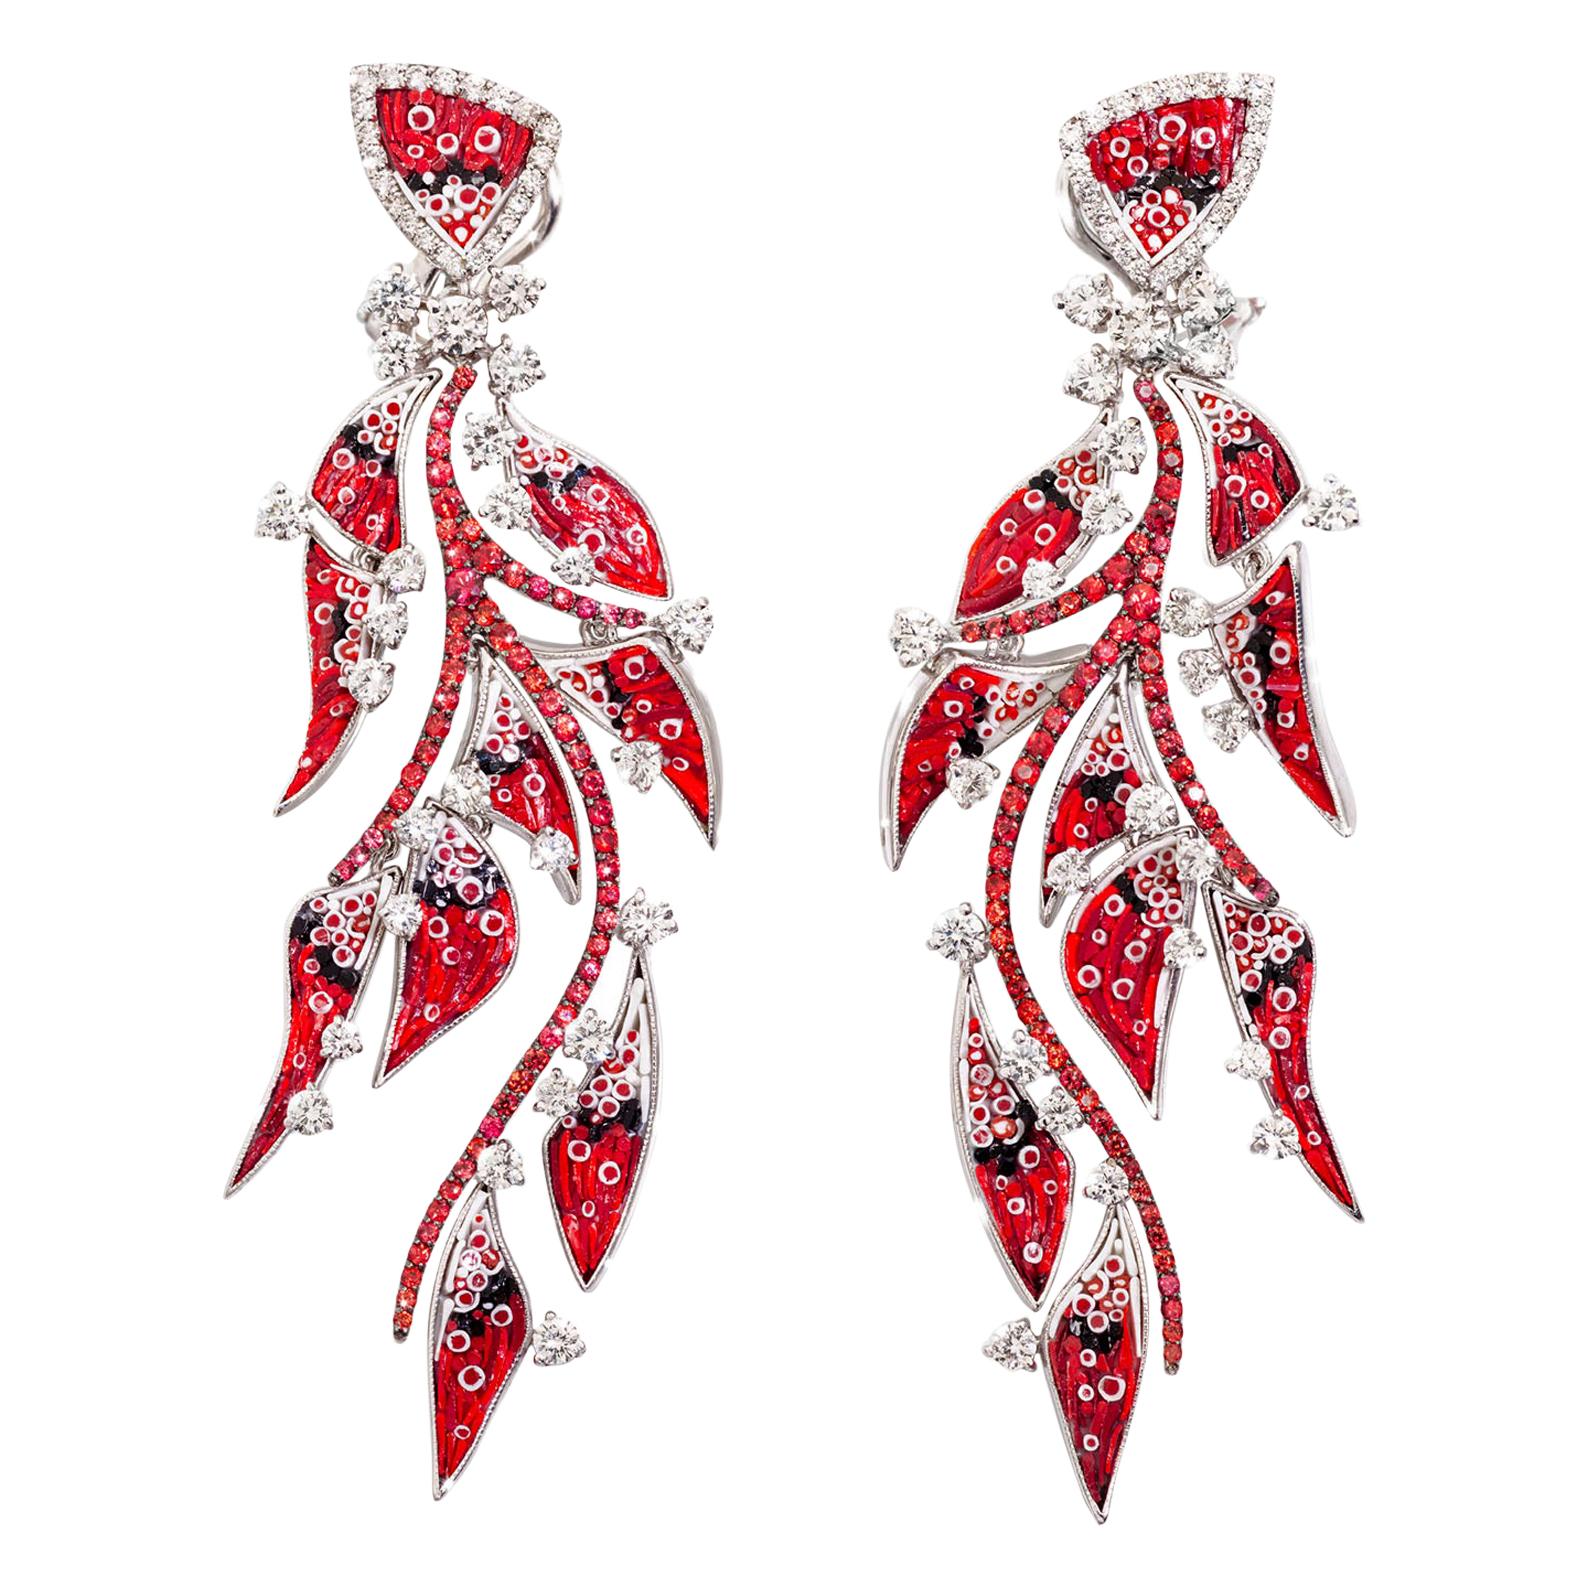 Earrings White Gold White Diamonds Sapphires HandDecorated with MicroMosaic